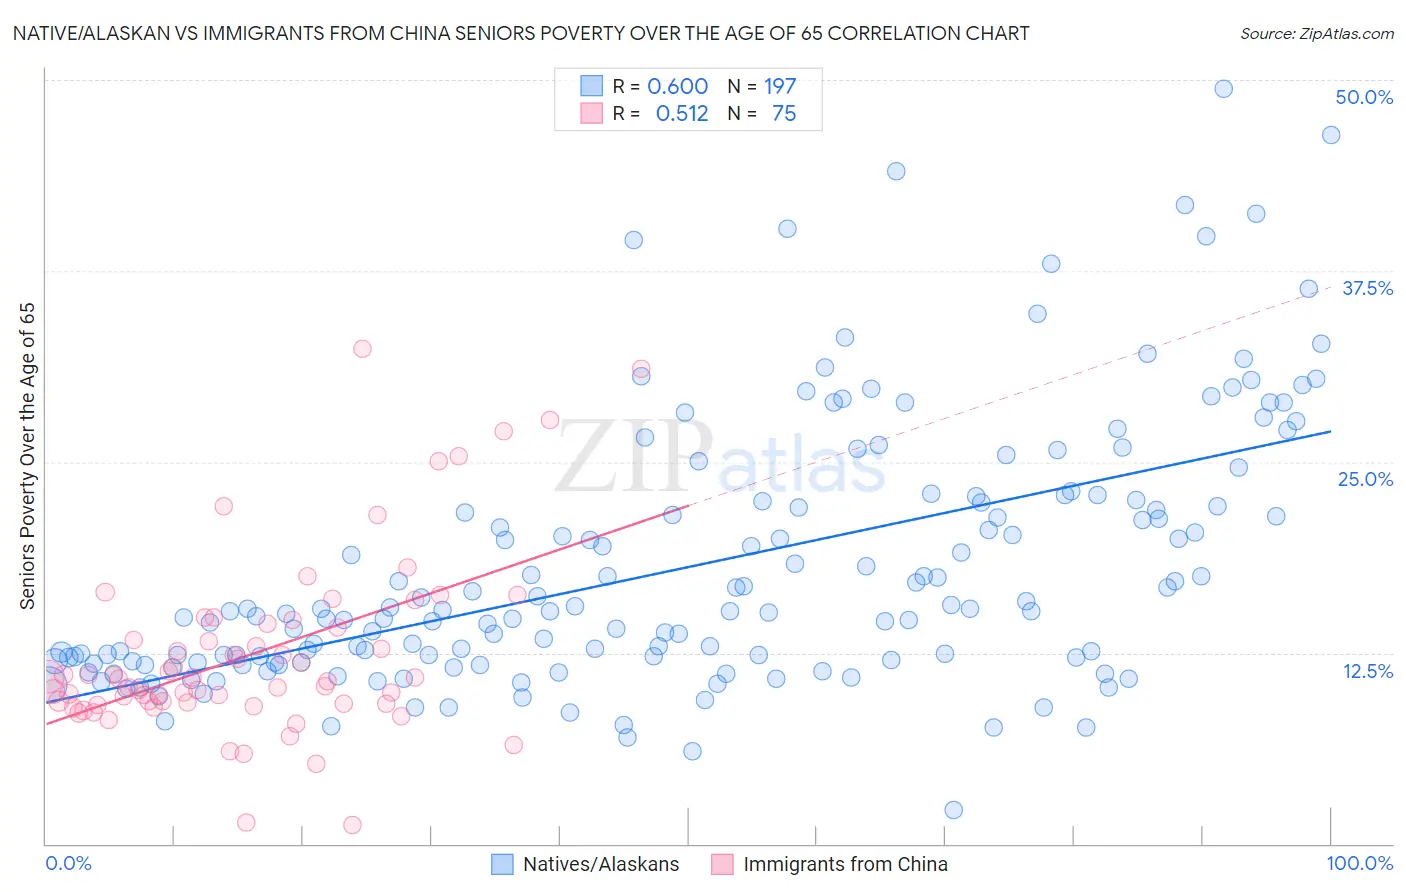 Native/Alaskan vs Immigrants from China Seniors Poverty Over the Age of 65